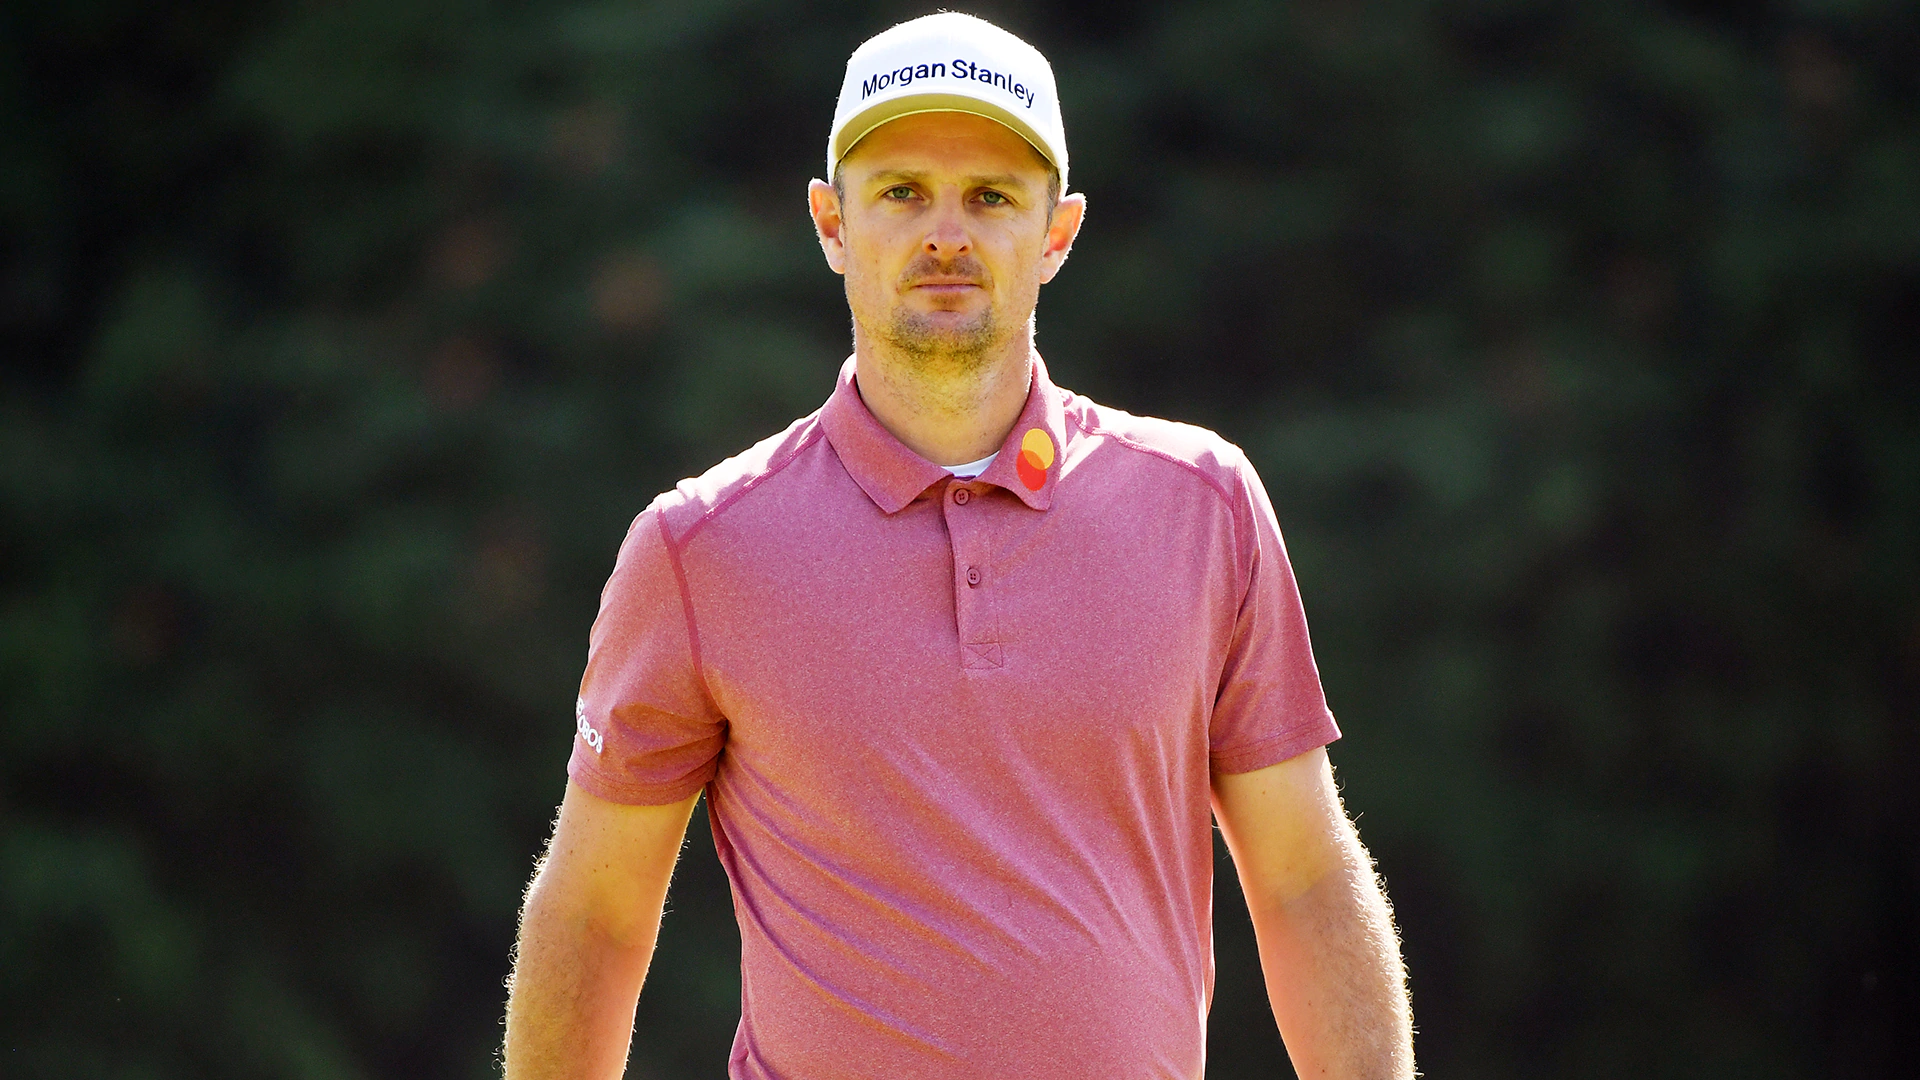 Justin Rose, wife to sponsor series of women’s British golf tournaments